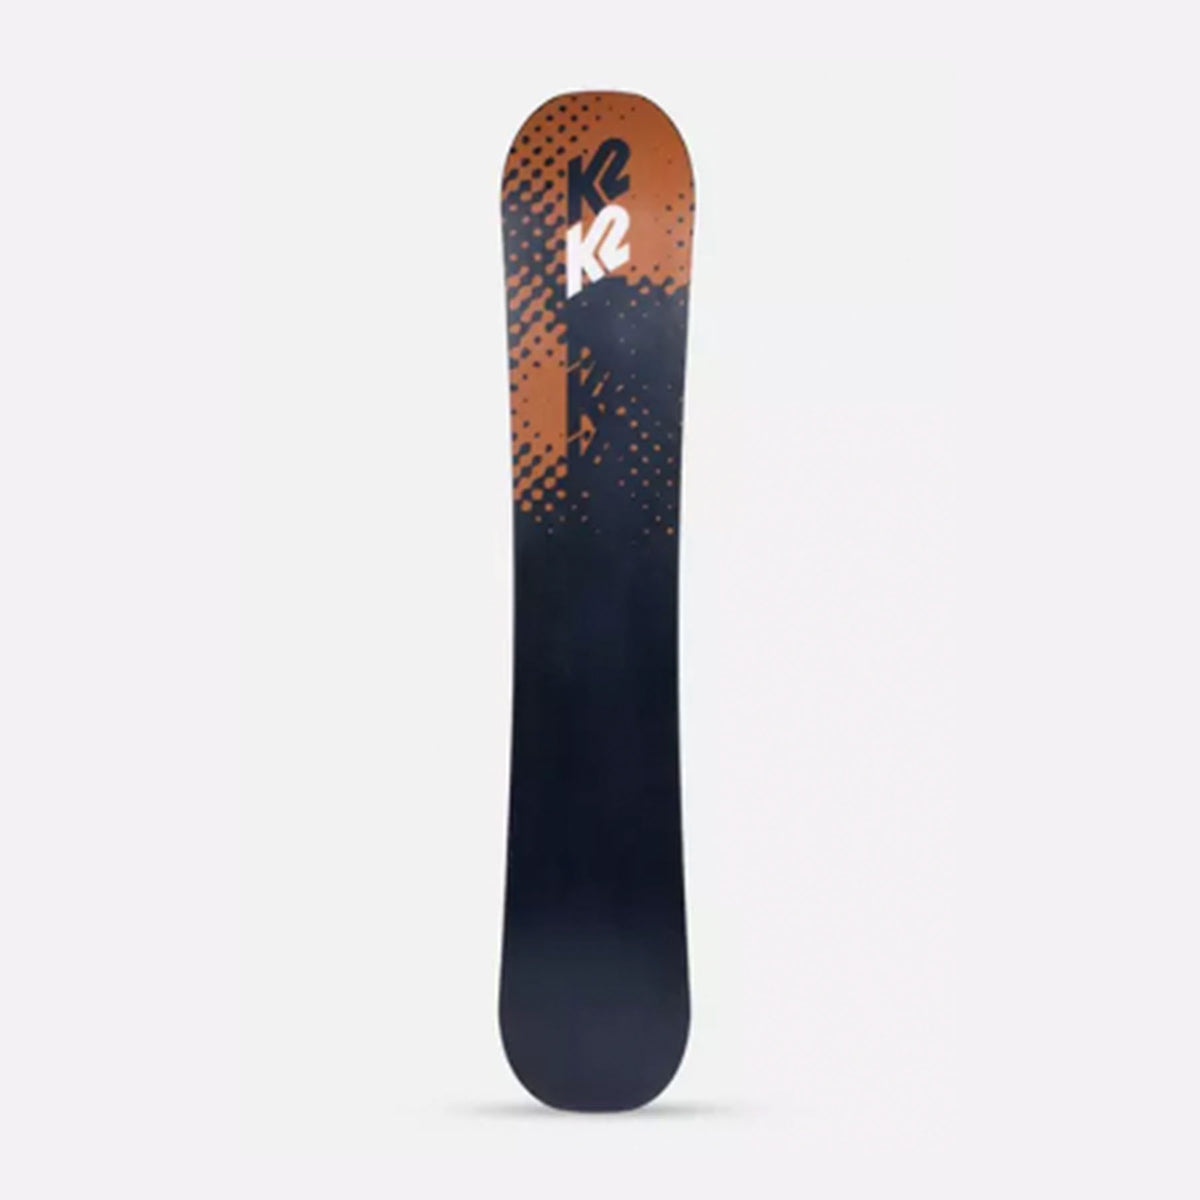 Image features the bottom of the Men's K2 Raygun snowboard in black, orange, and with a black K2 logo as well as a white K2 logo printed on the nose.